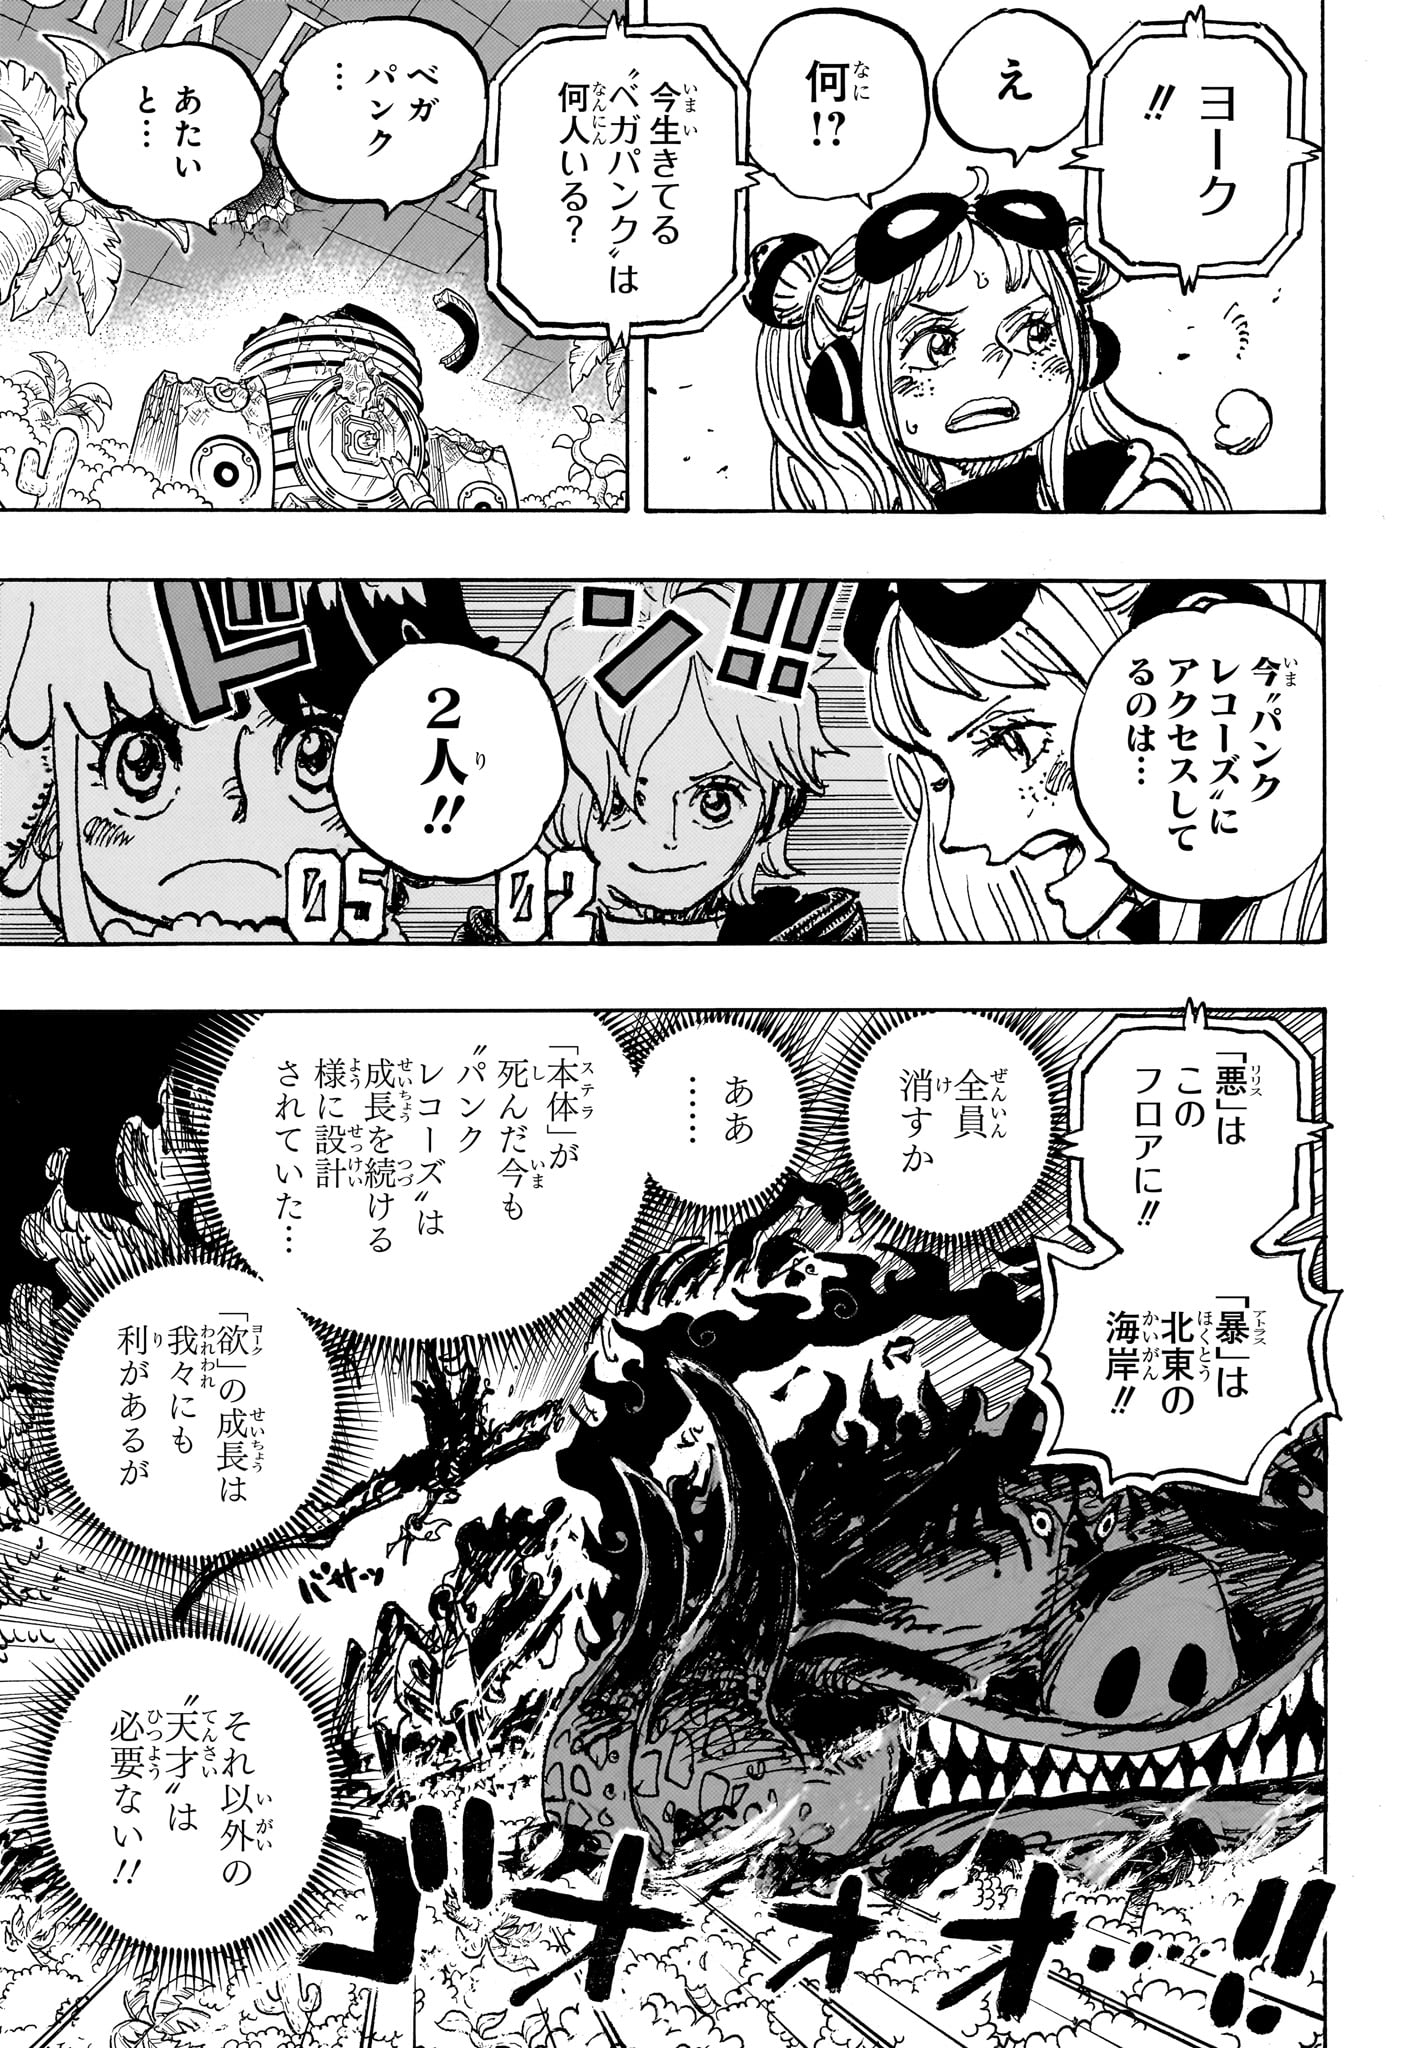 One Piece - Chapter 1118 - Page 5